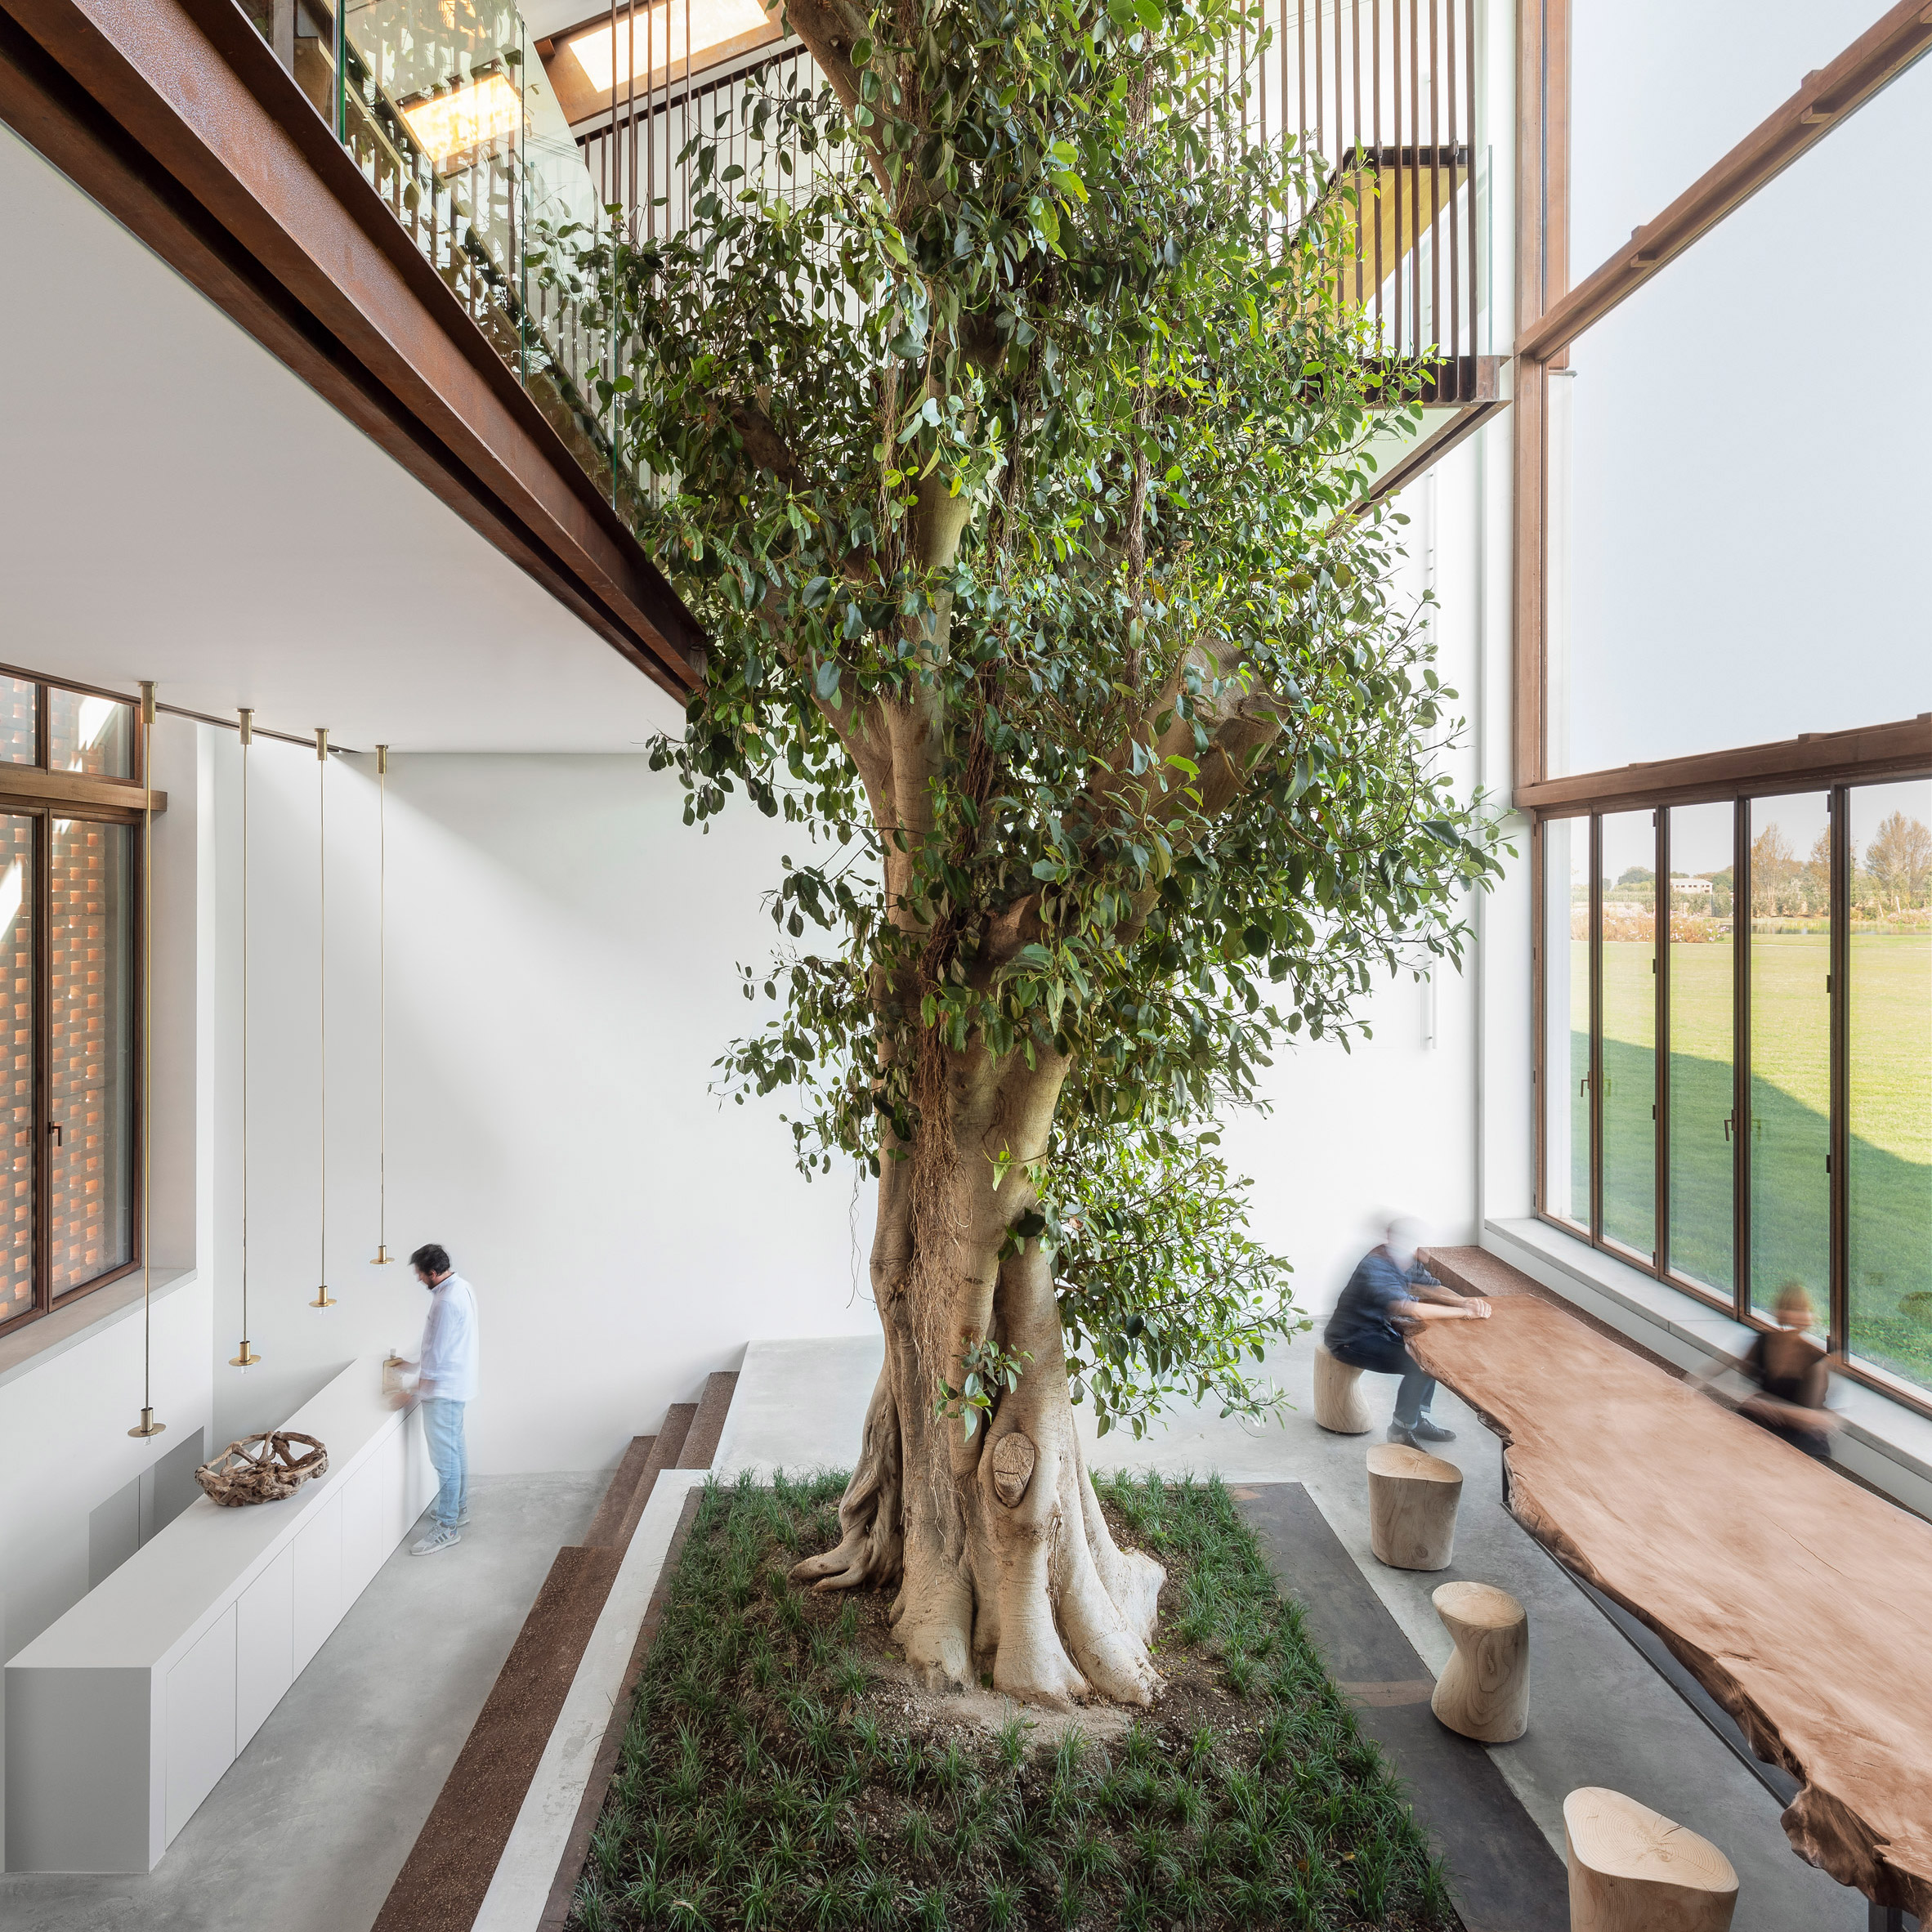 10 Ways to Add Biophilic Design Elements to Your Home - PLANT THE FUTURE